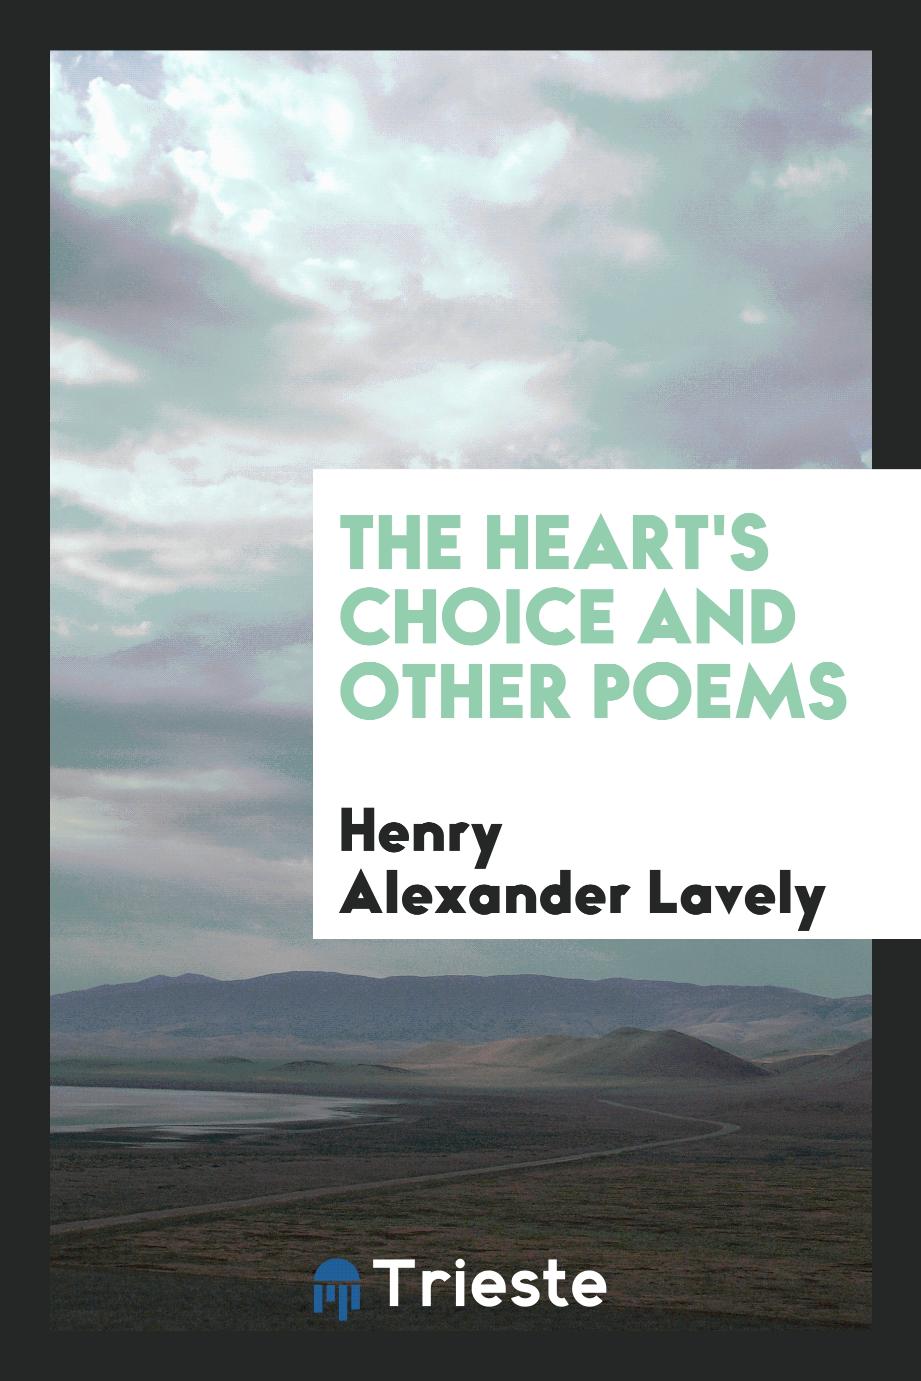 The Heart's Choice and Other Poems